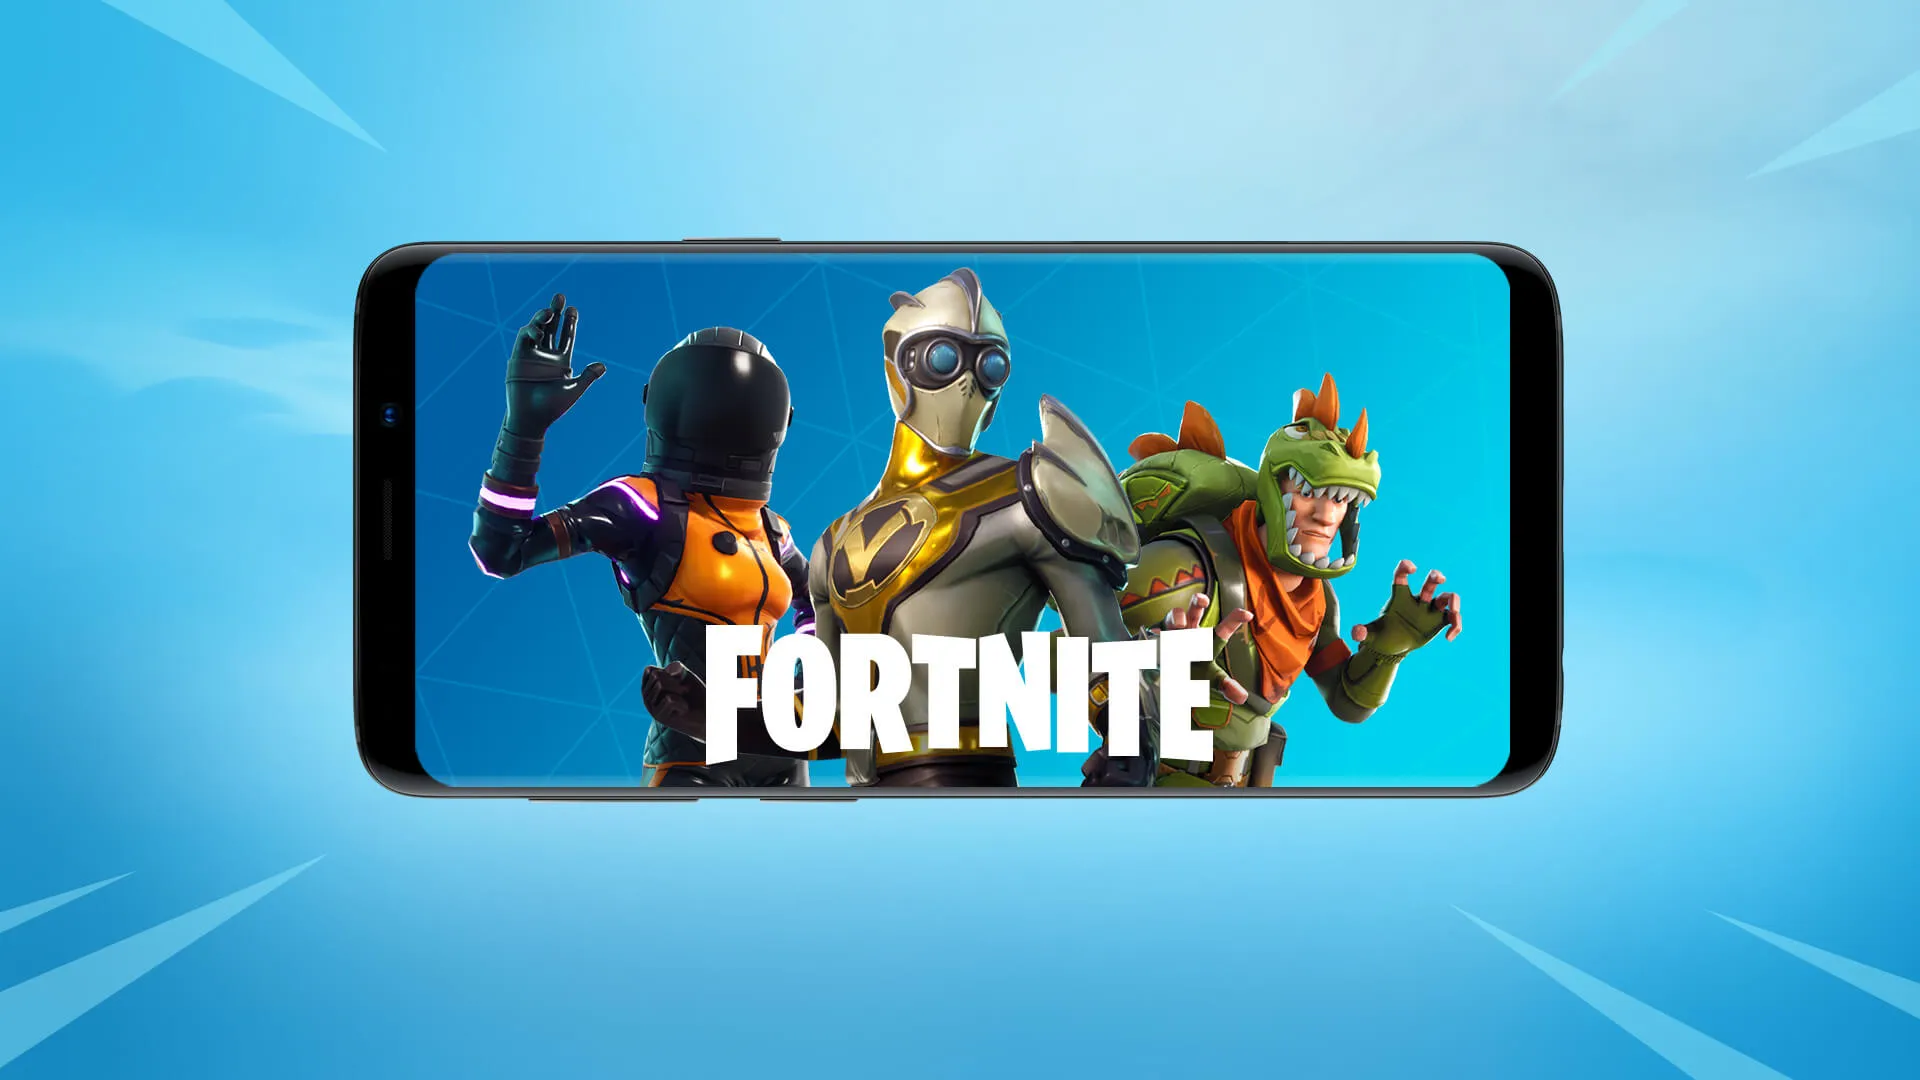 How to install Fortnite on Android